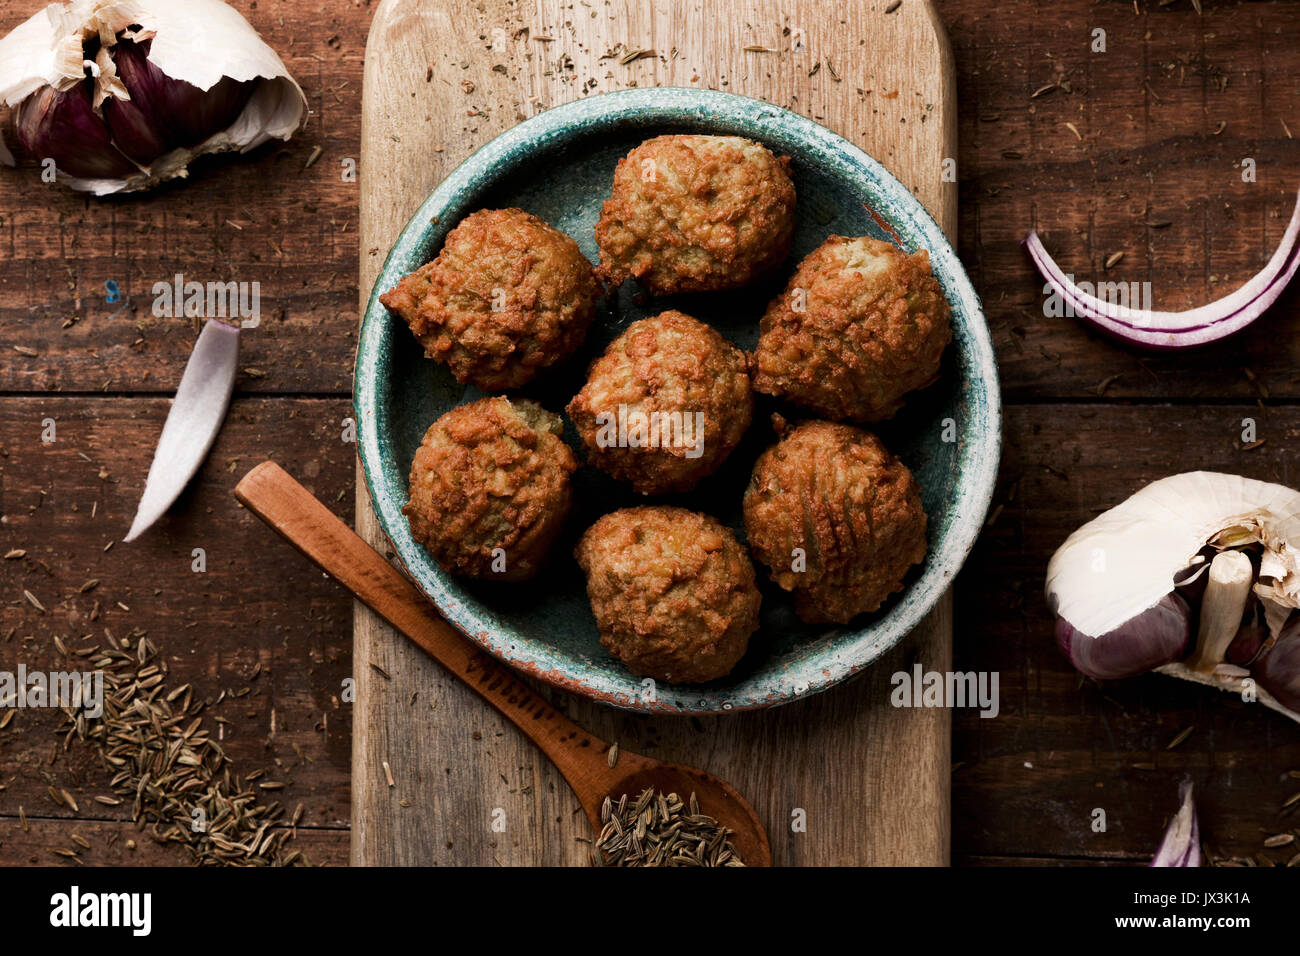 high-angle shot of some falafel served in a green earthenware plate placed on a rustic wooden table Stock Photo